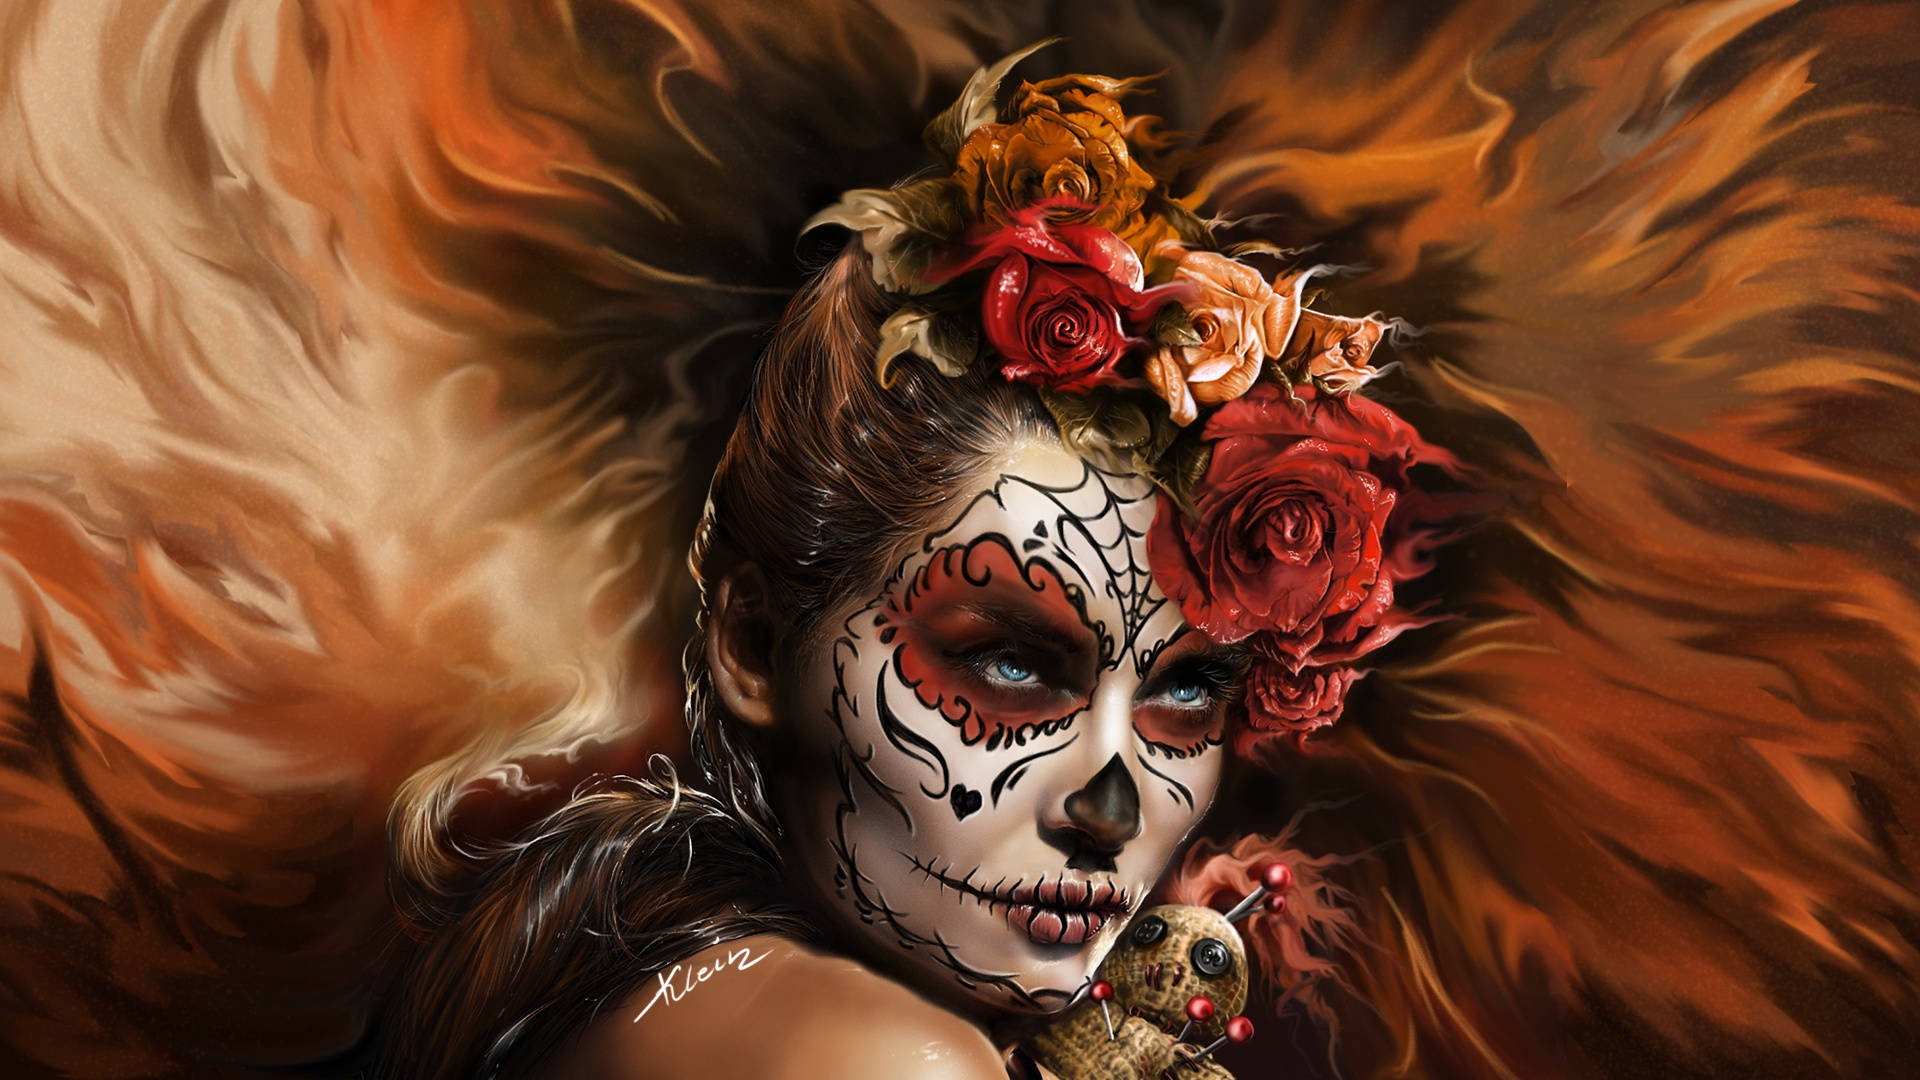 "Let Life Be Fiery and Bold like a Sugar Skull" Wallpaper